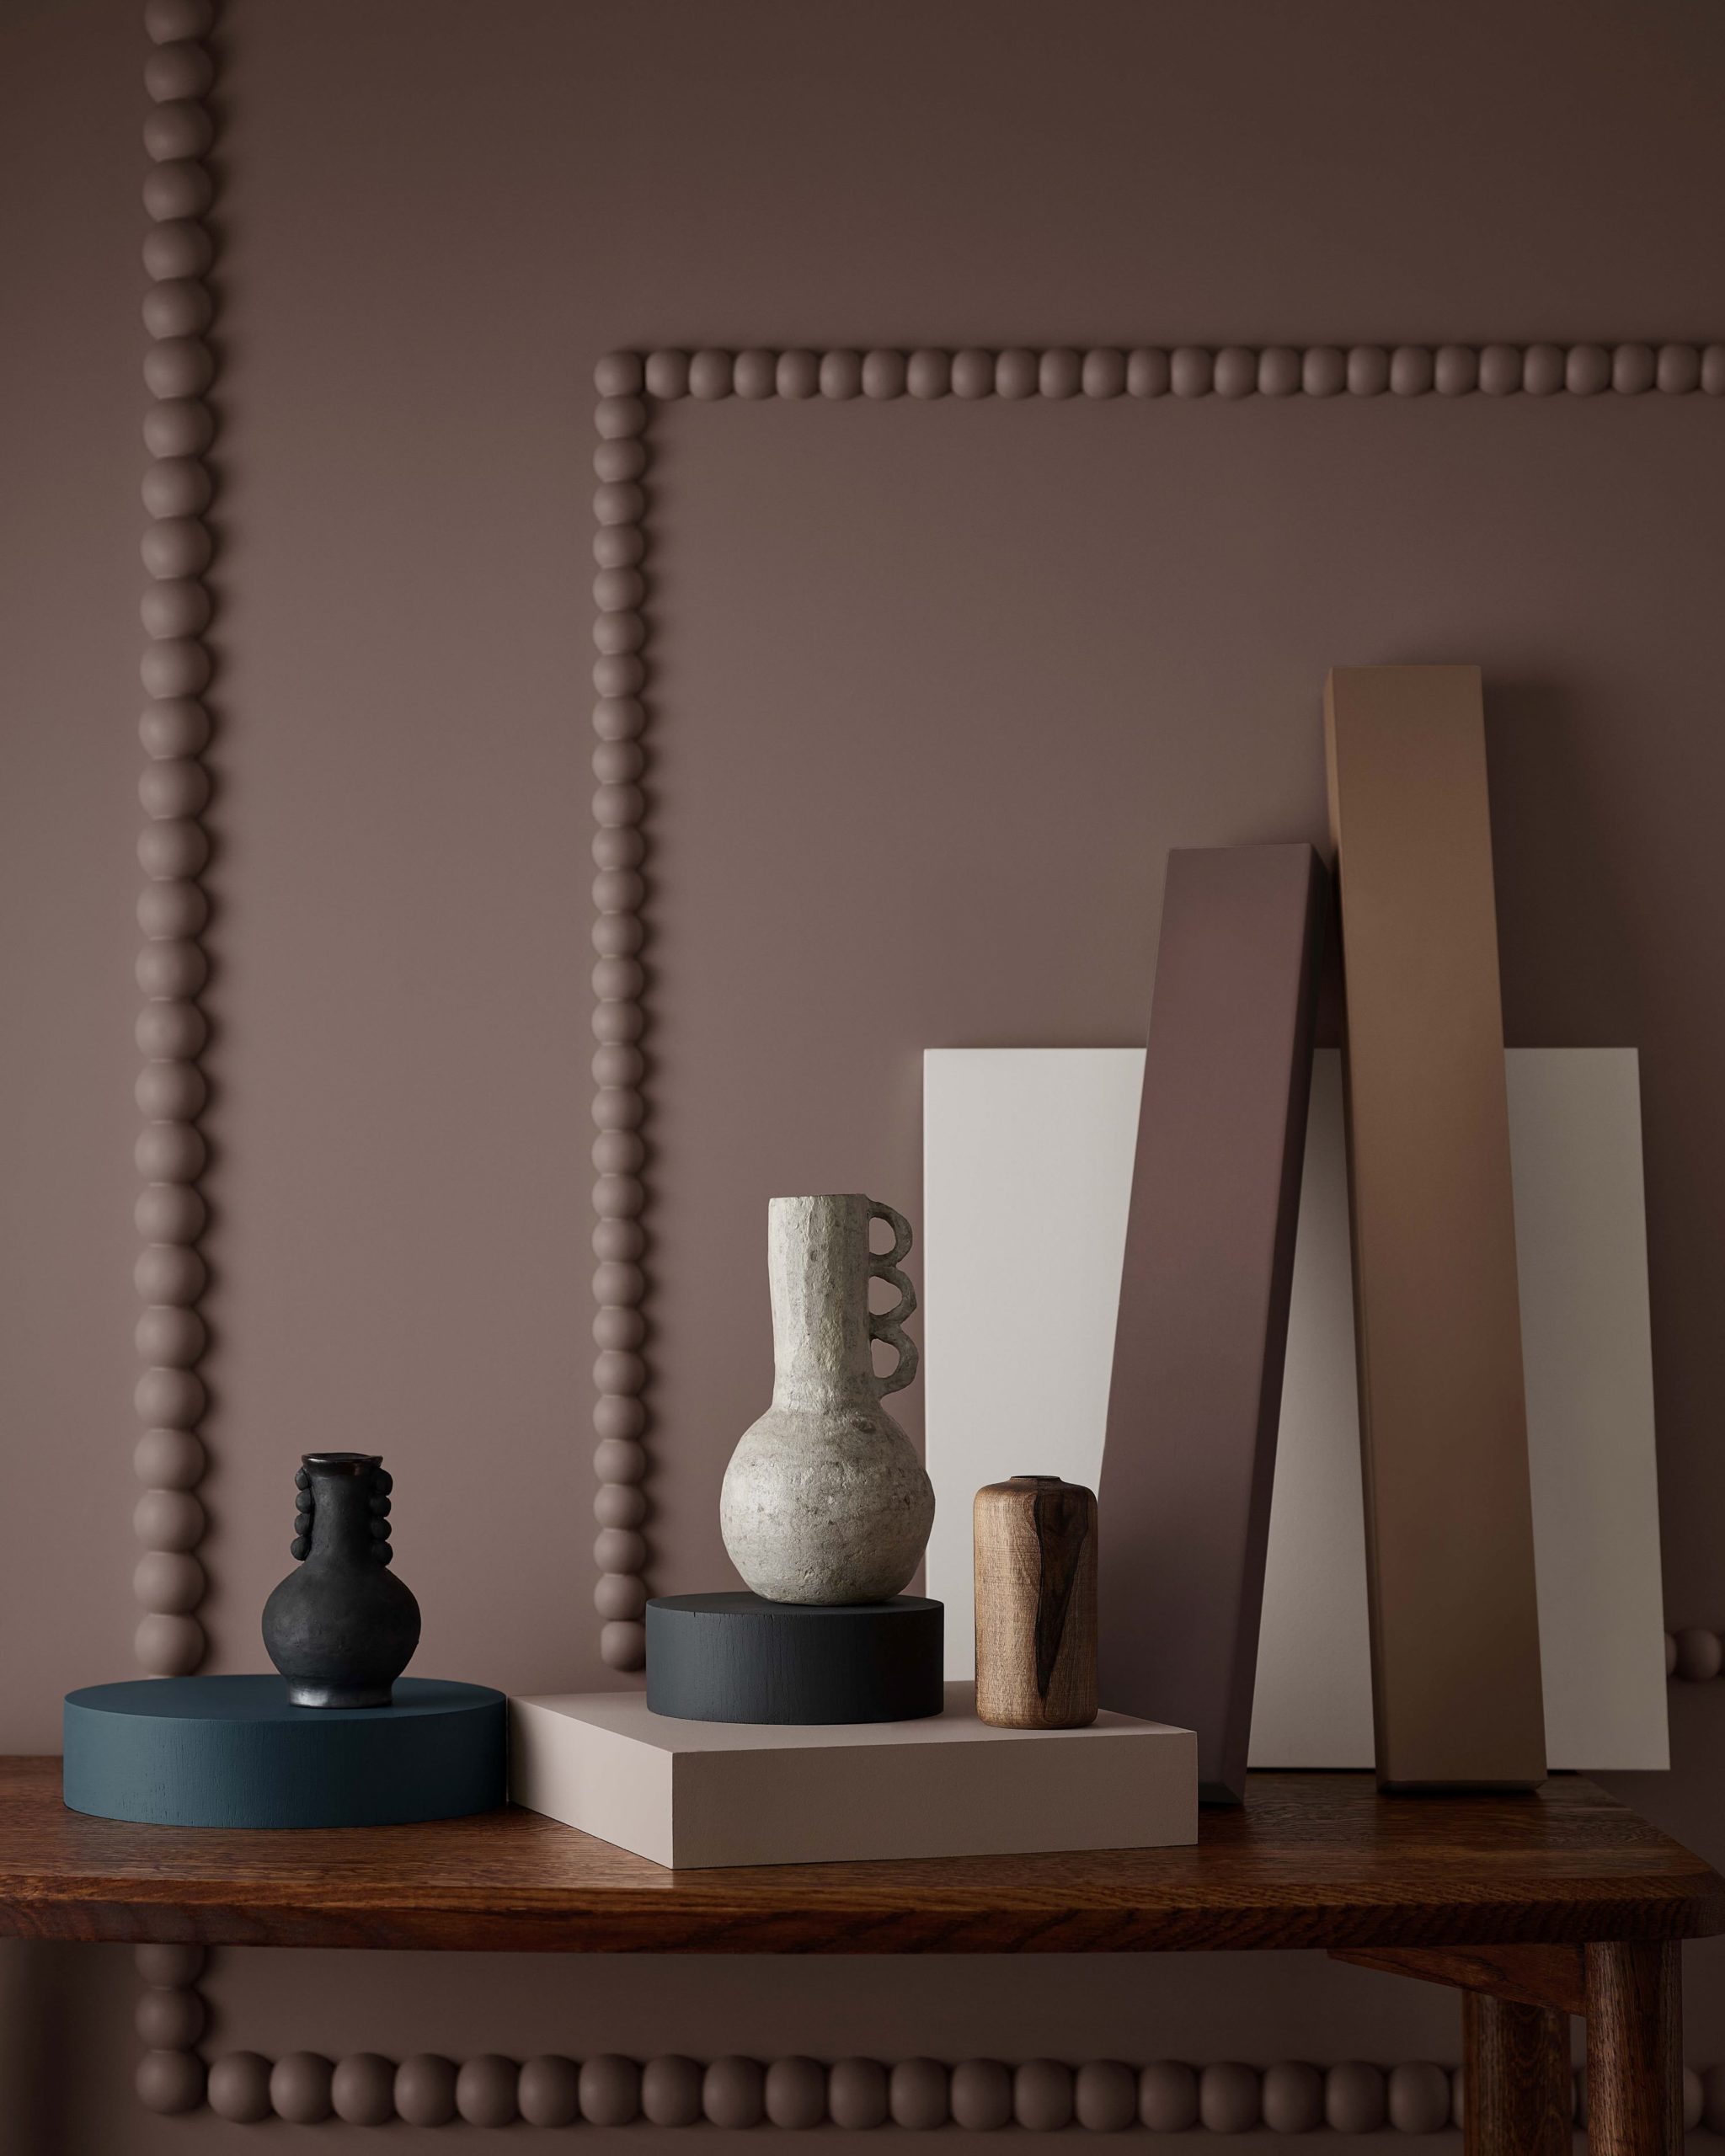 Crown Paints has revealed its Colour Insights for 2024/2025 – described as “a carefully curated set of colours, inspired by global trends, that will support decorators in having colour conversations with customers.”